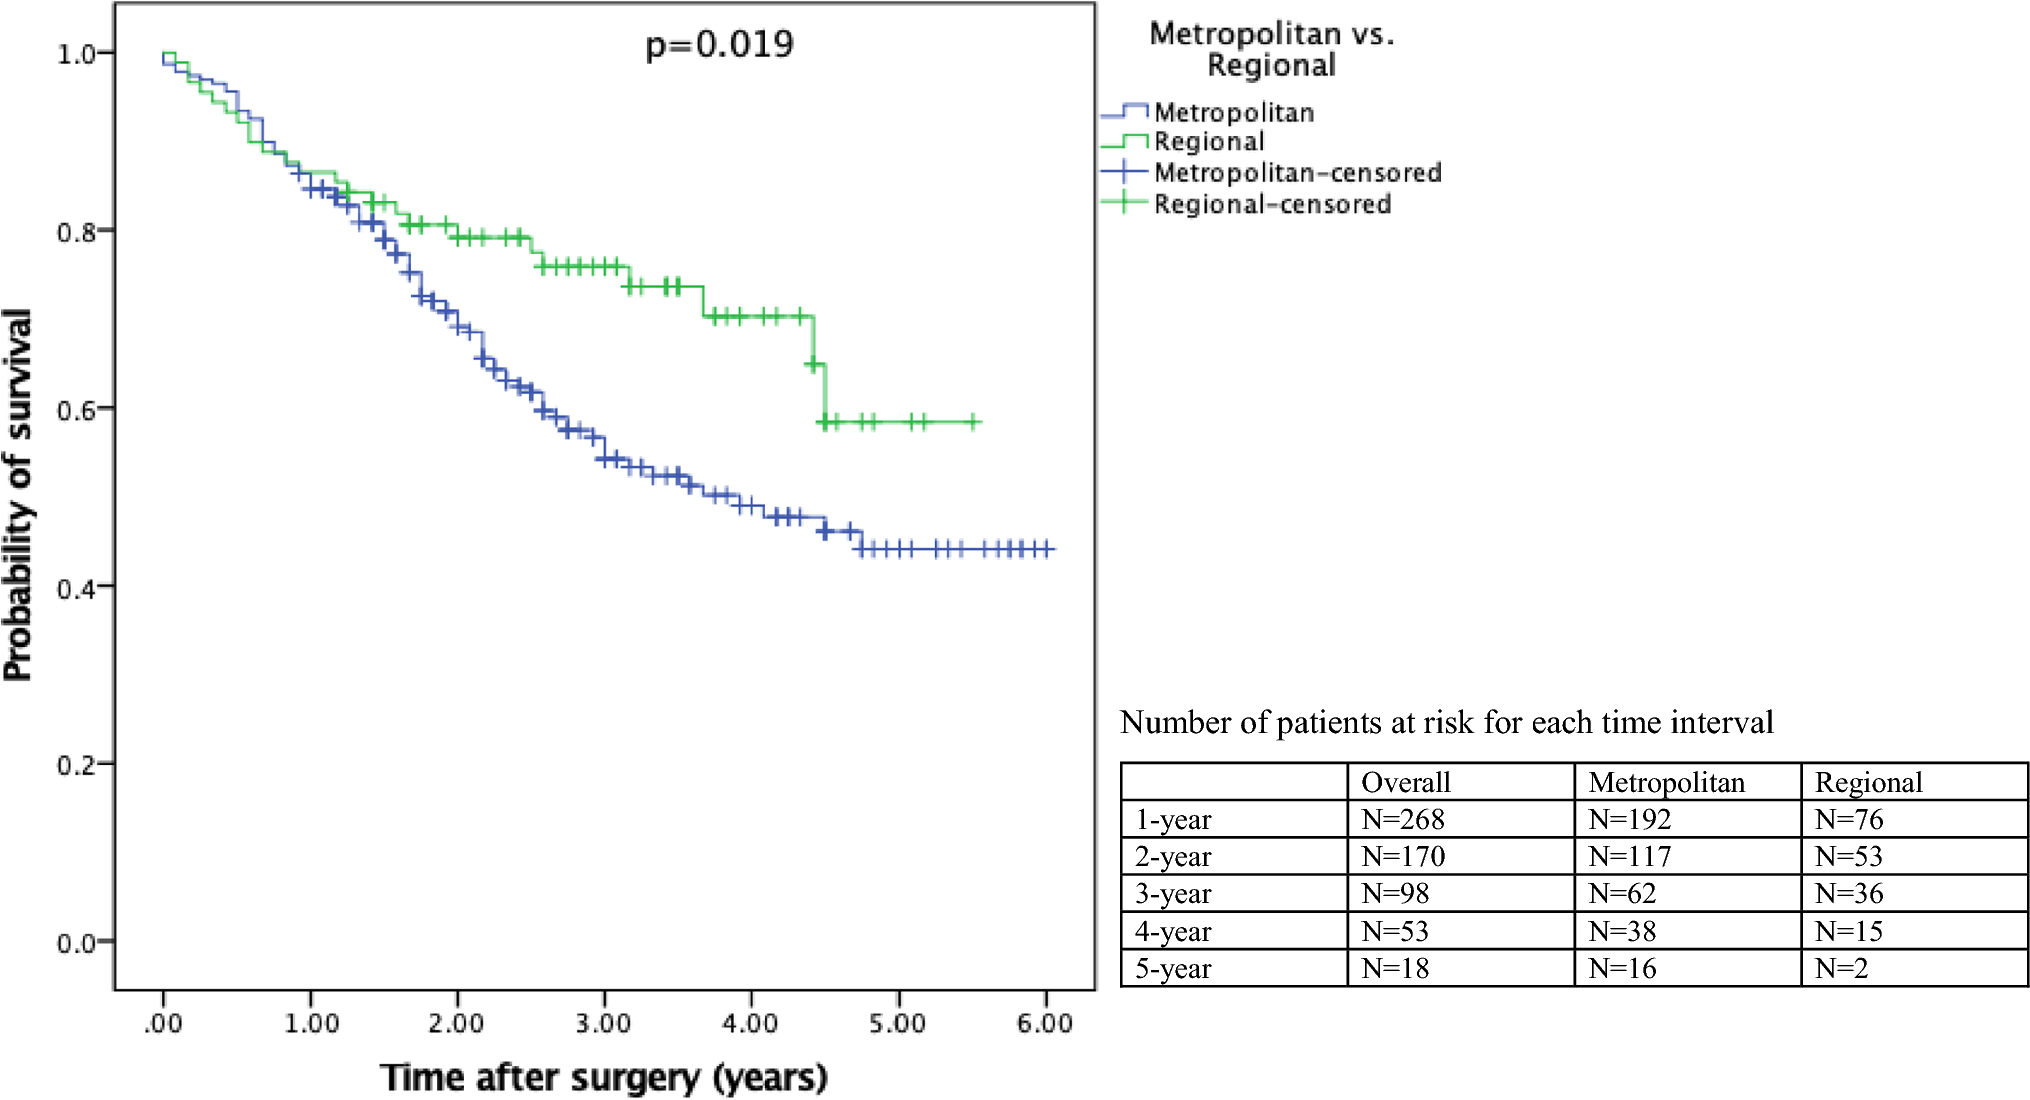 Evaluating geographical disparities on clinical outcomes following cytoreductive surgery and hyperthermic intraperitoneal chemotherapy